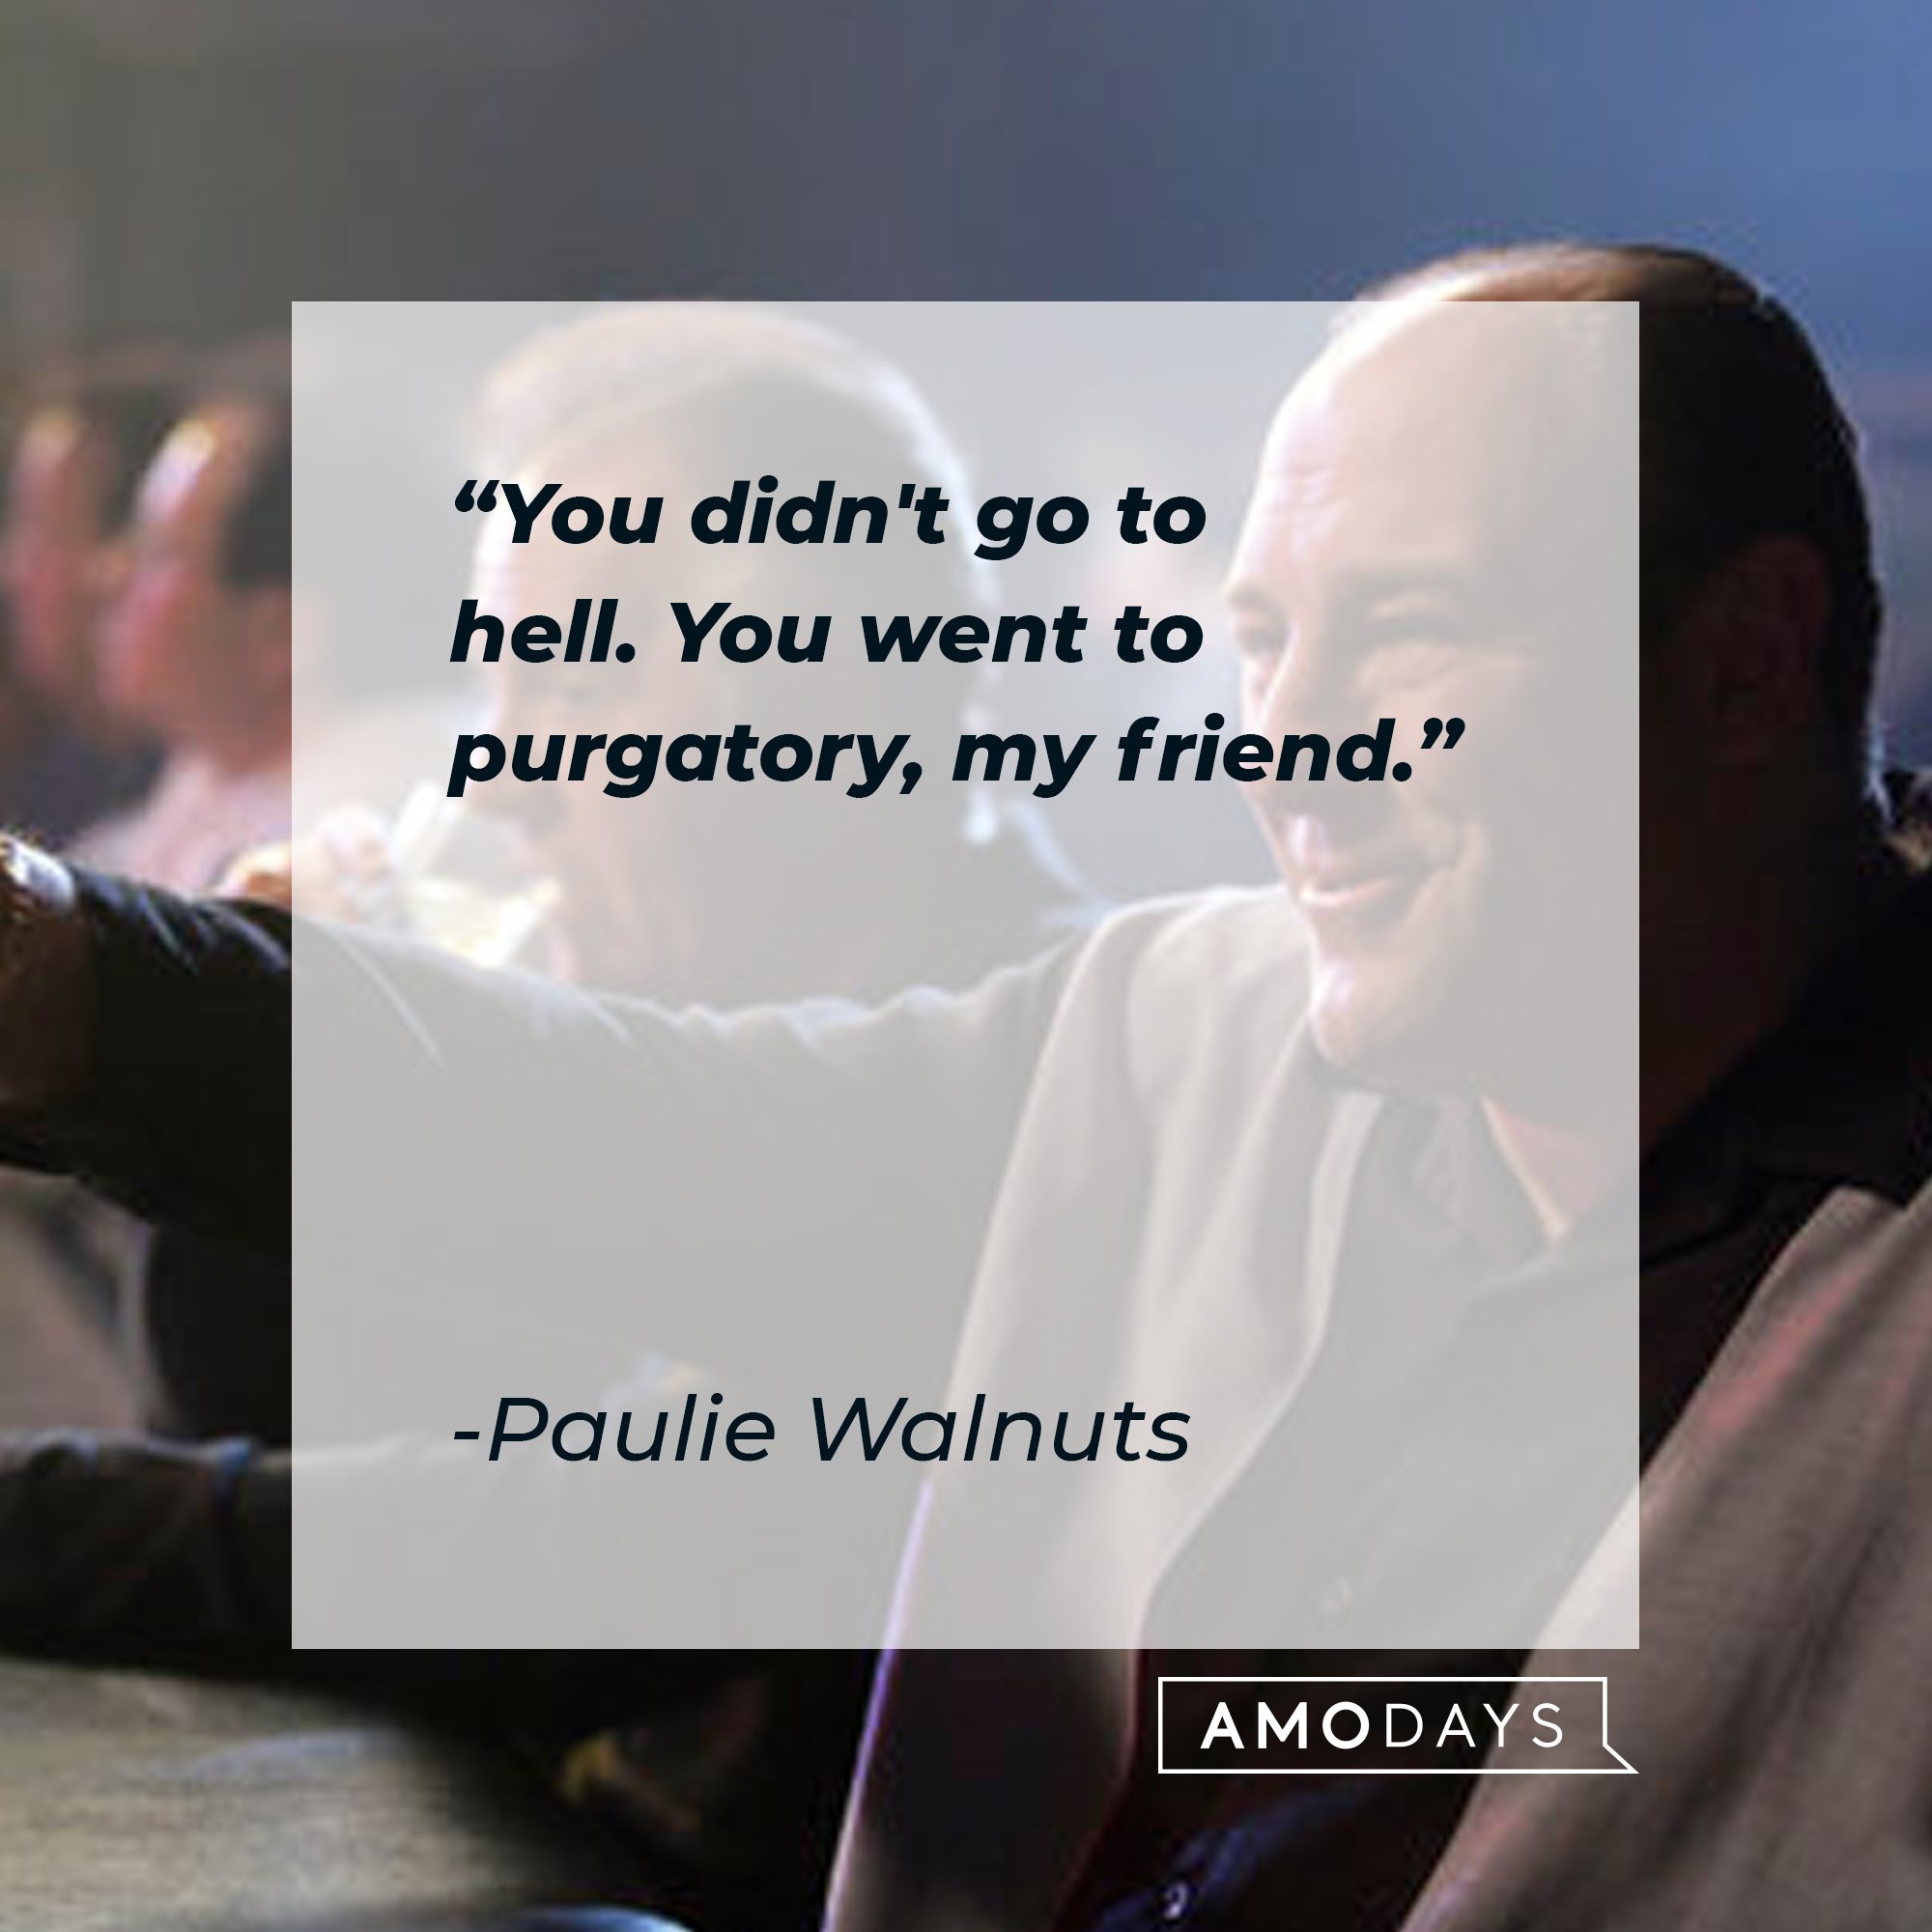 Paulie Walnuts' quote: "You didn't go to hell. You went to purgatory, my friend." | Image: AmoDays 